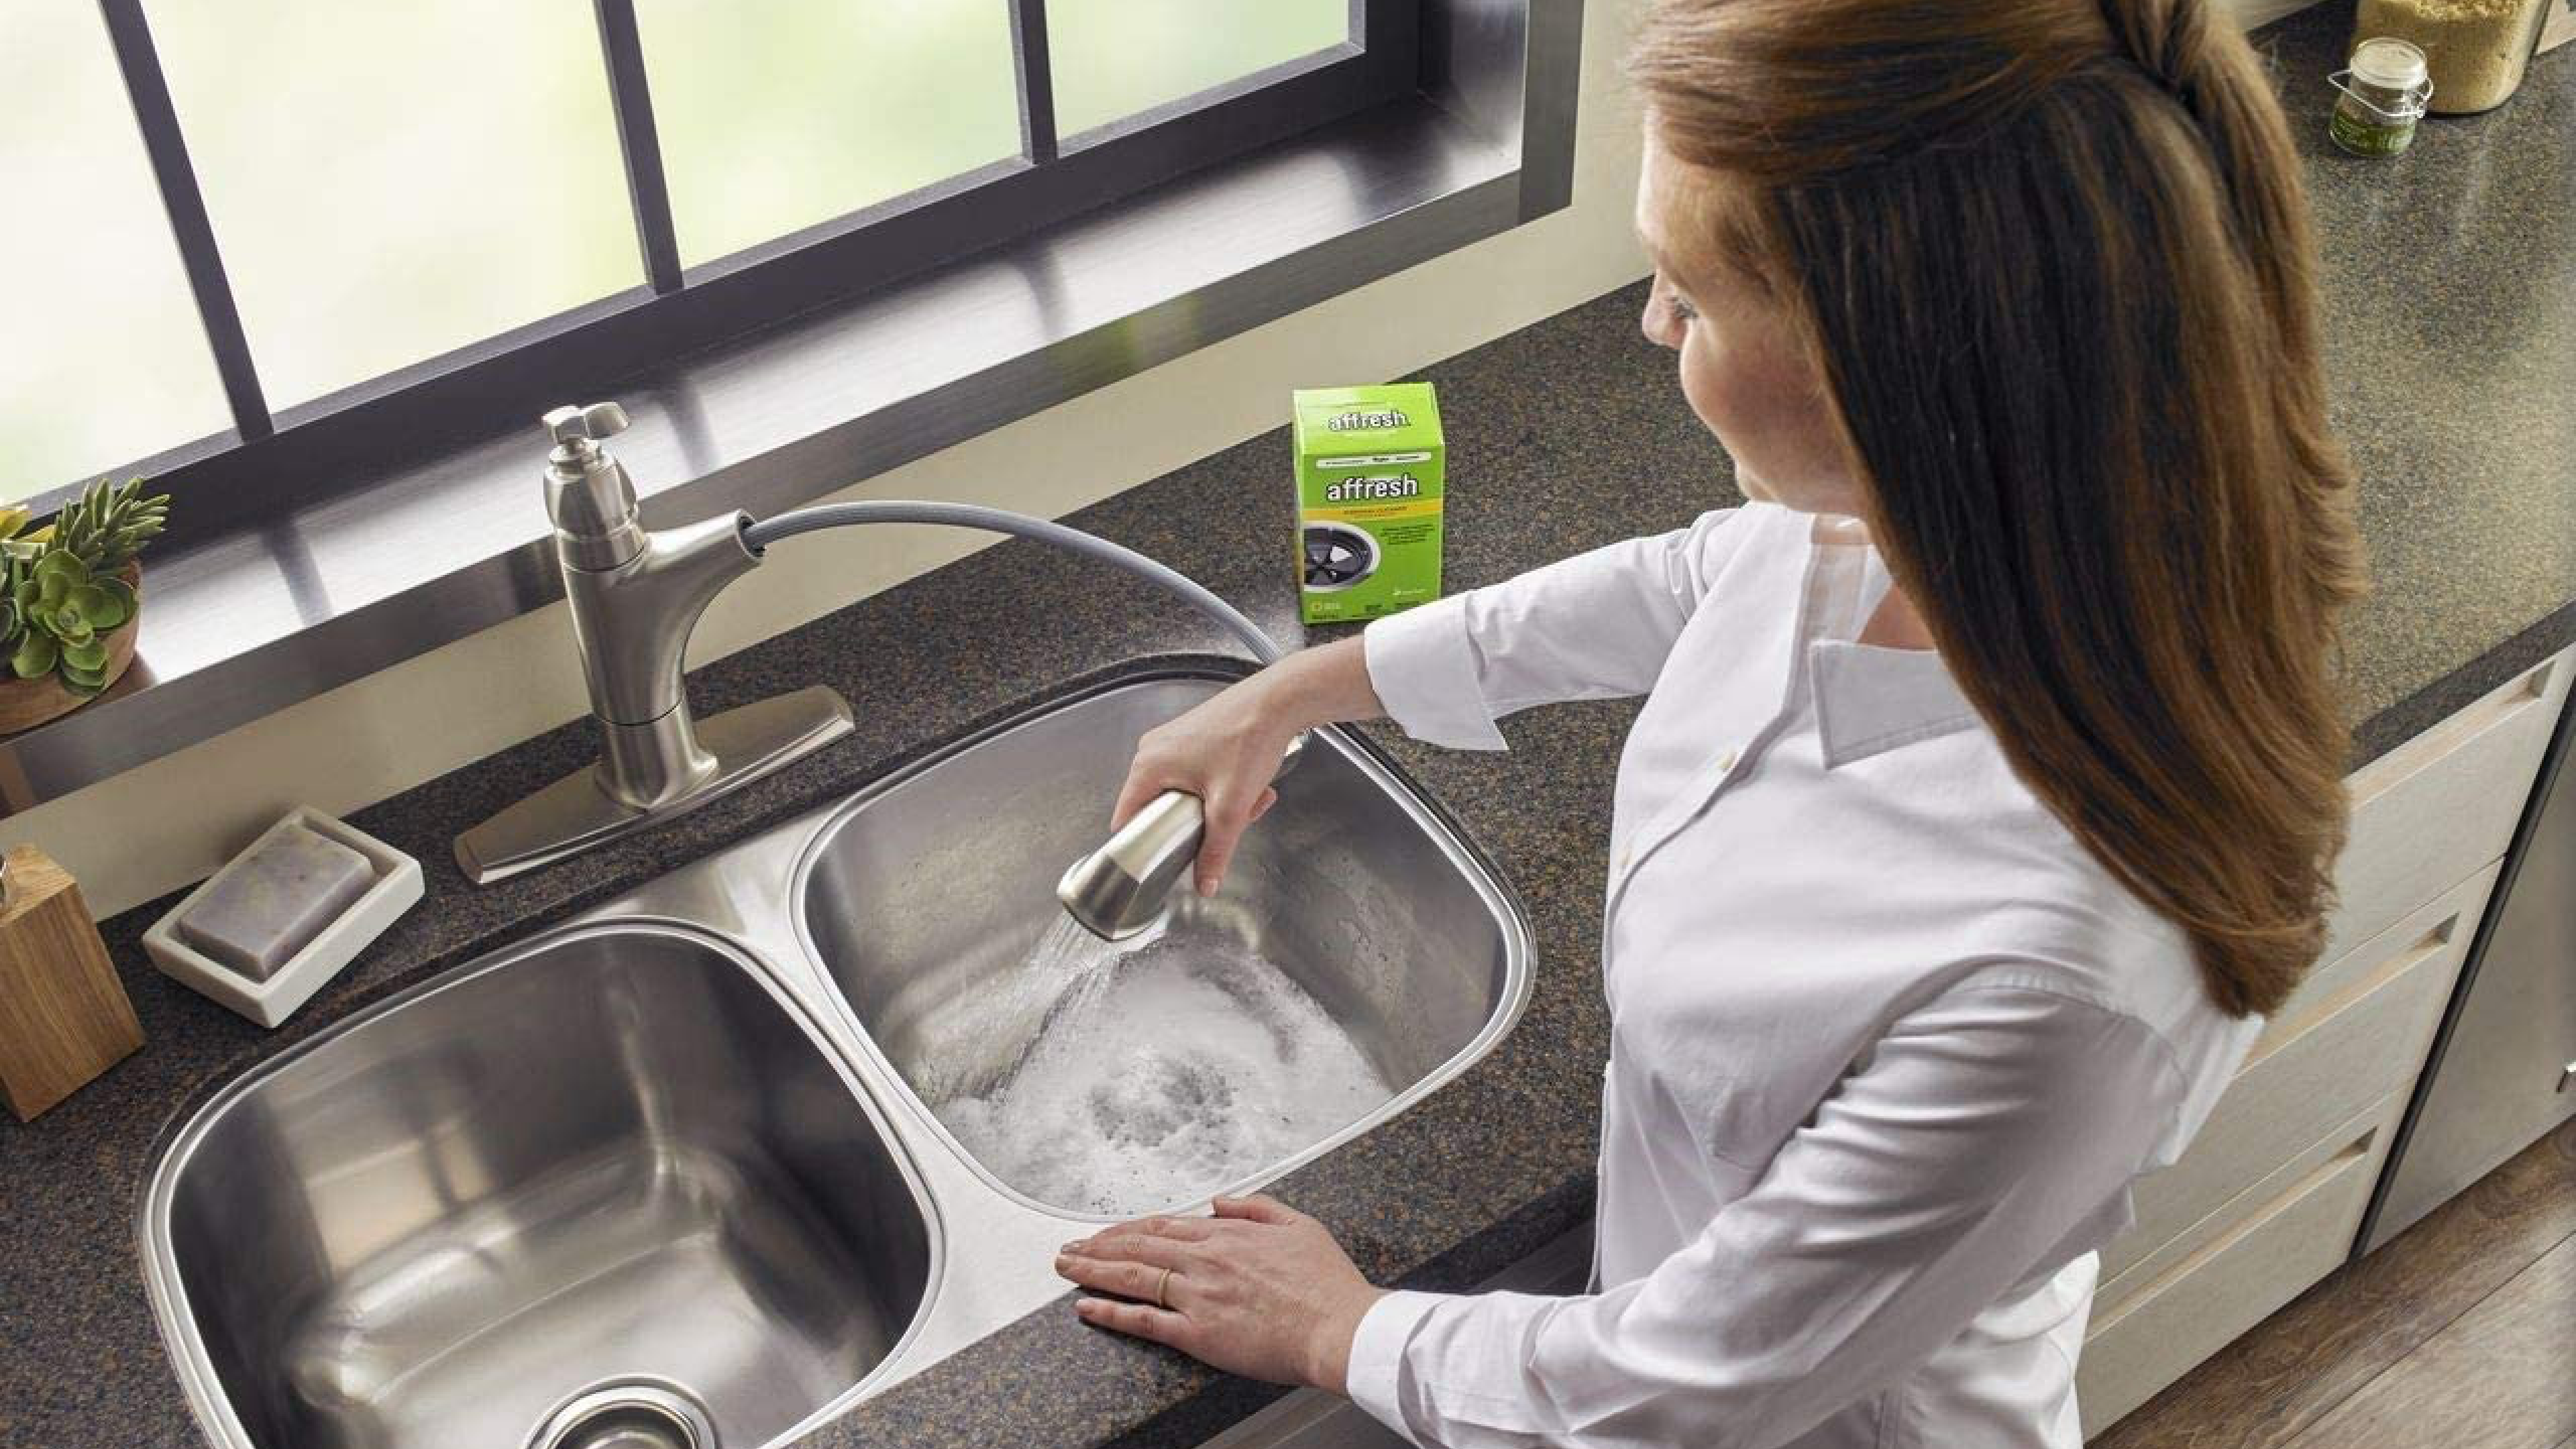 garbage disposal cleaning tablets that you can drop in